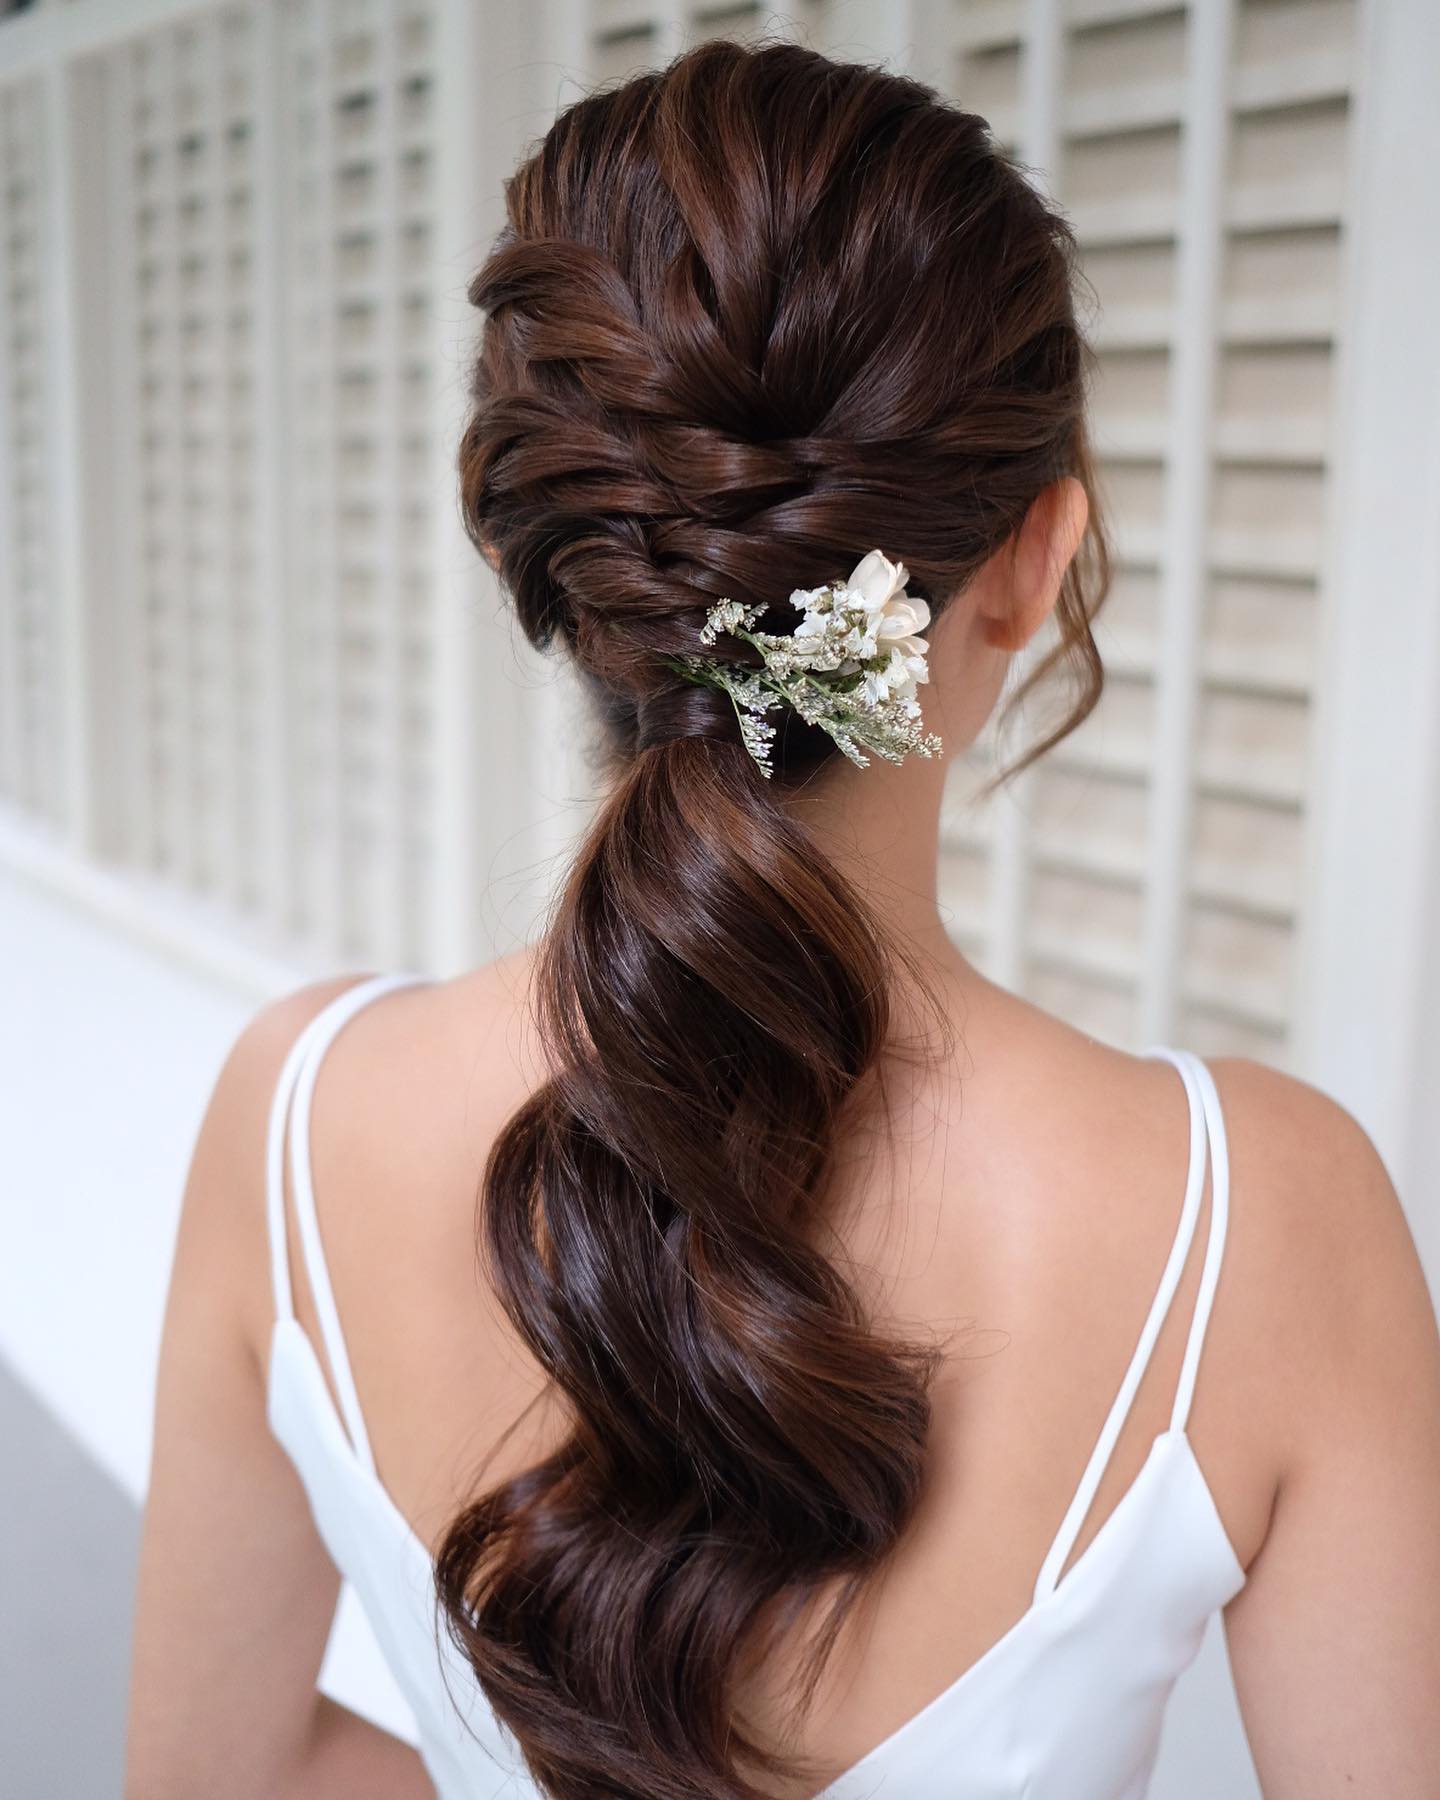 braid into ponytail with floral accessory